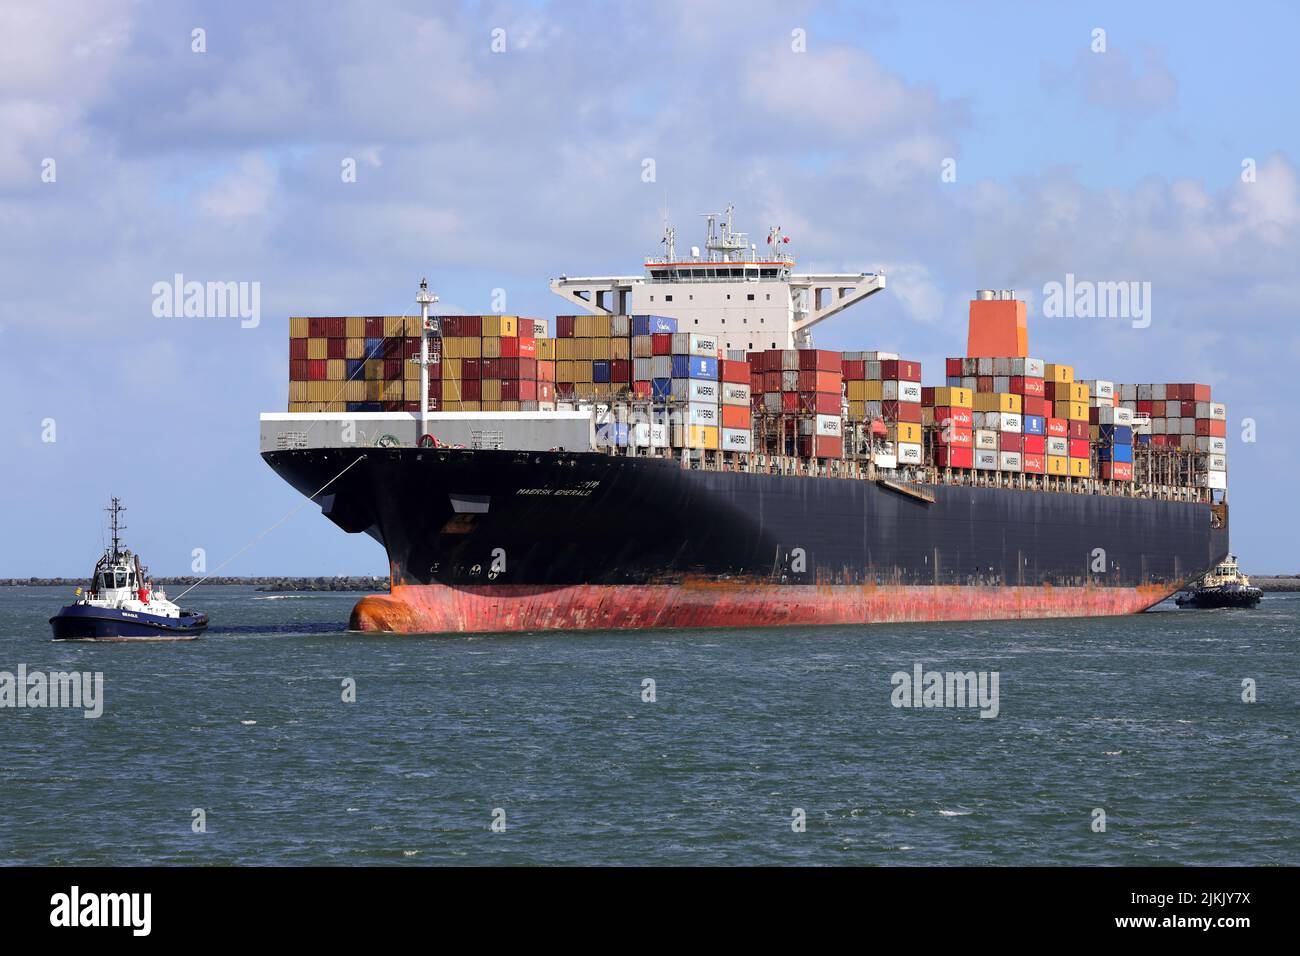 The container ship Maersk Emerald arrives in the port of Rotterdam on May 28, 2022. Stock Photo